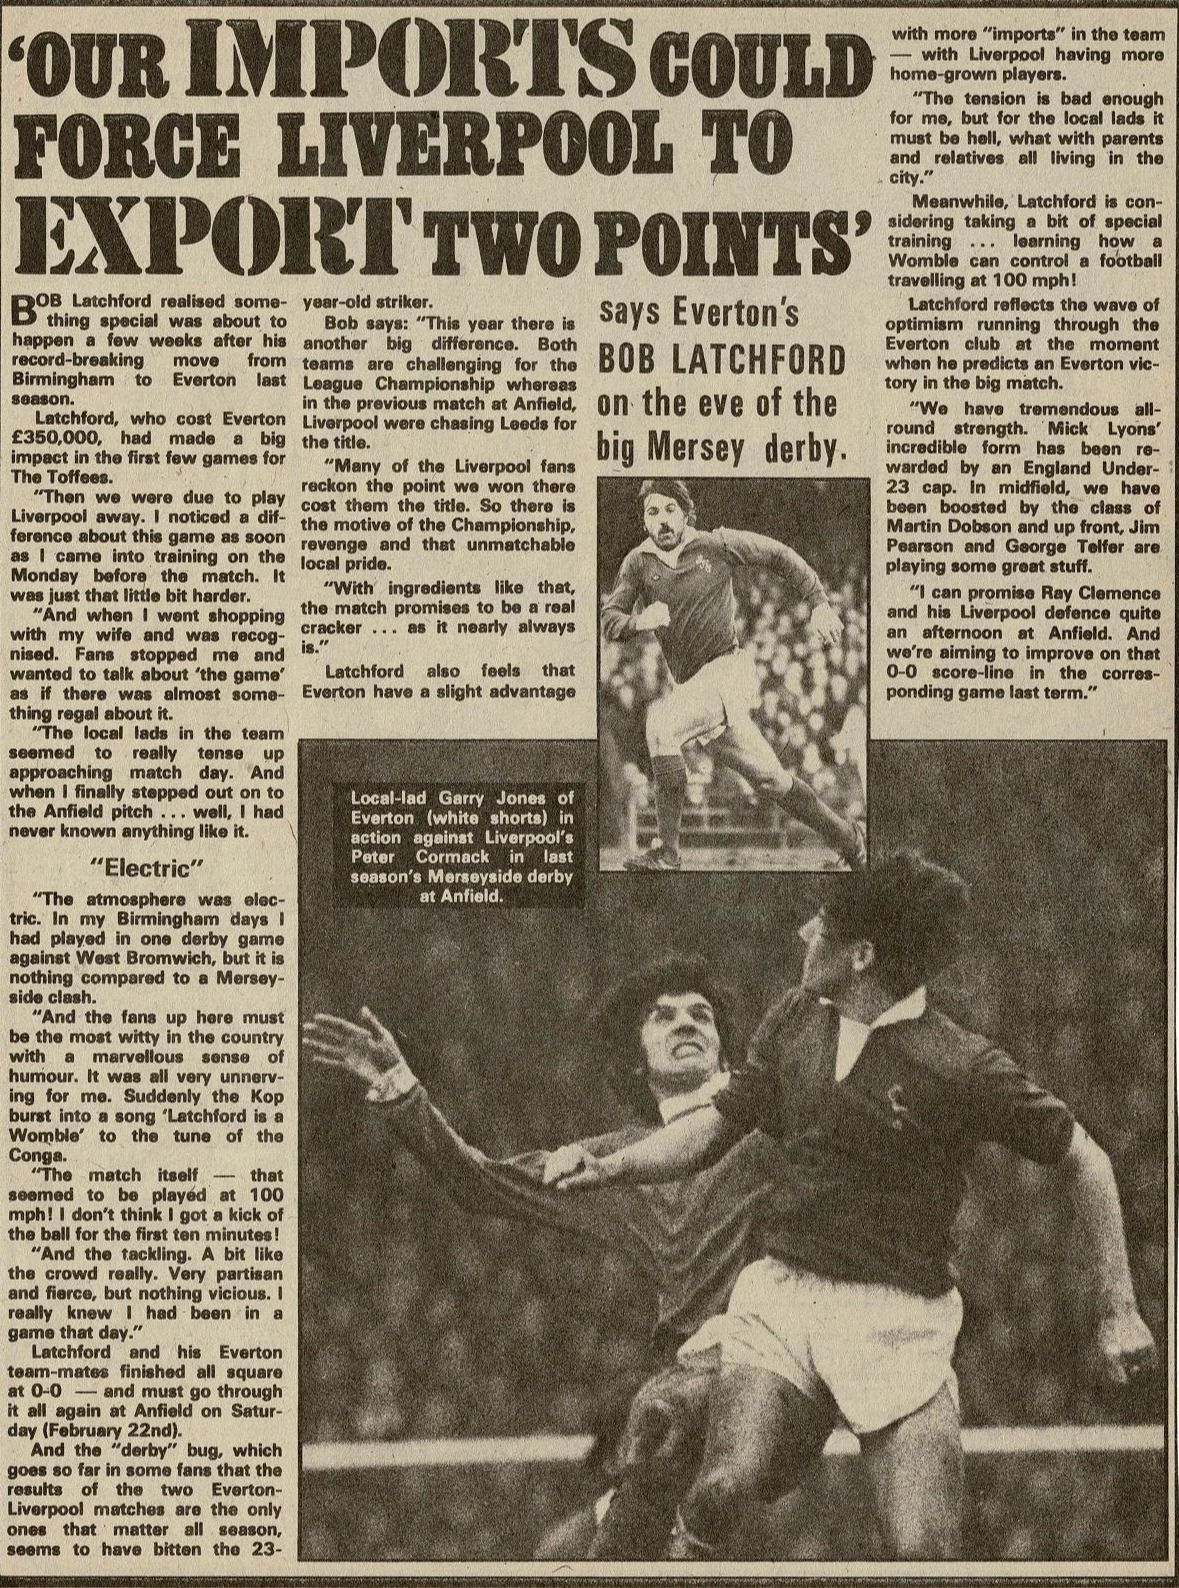 750301 'Our imports could force Liverpool to export two points' (Shoot, inc Goal, 8).jpg